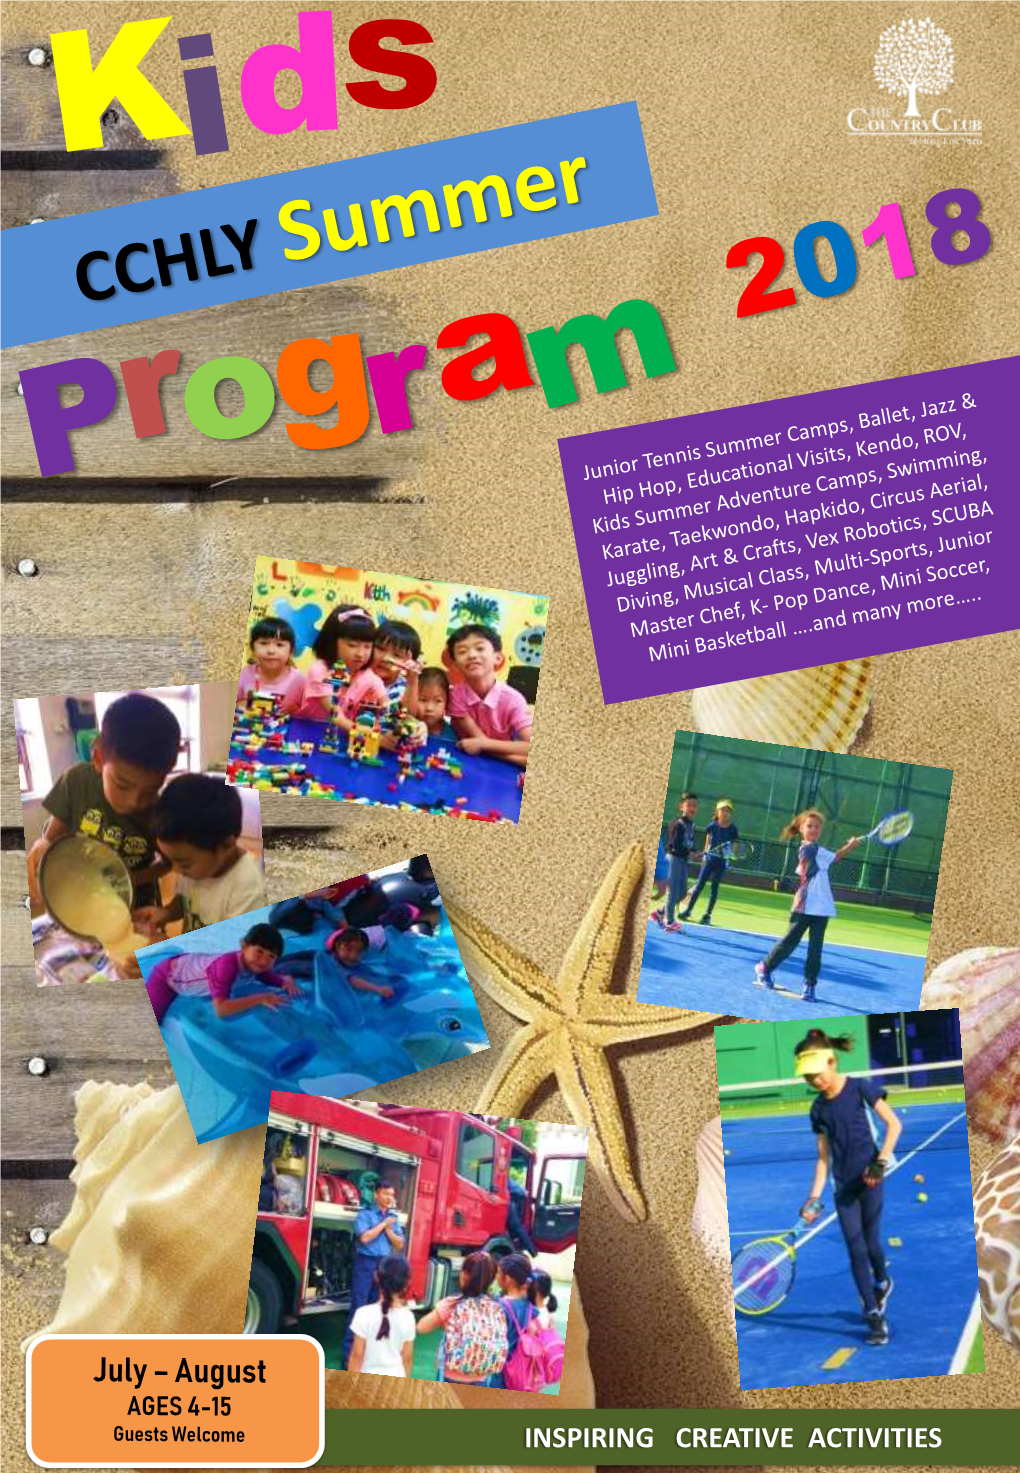 INSPIRING CREATIVE ACTIVITIES for Juniors Age 4 to 10 Years Old SUMMER 2018 CCHLY Tennis Camps